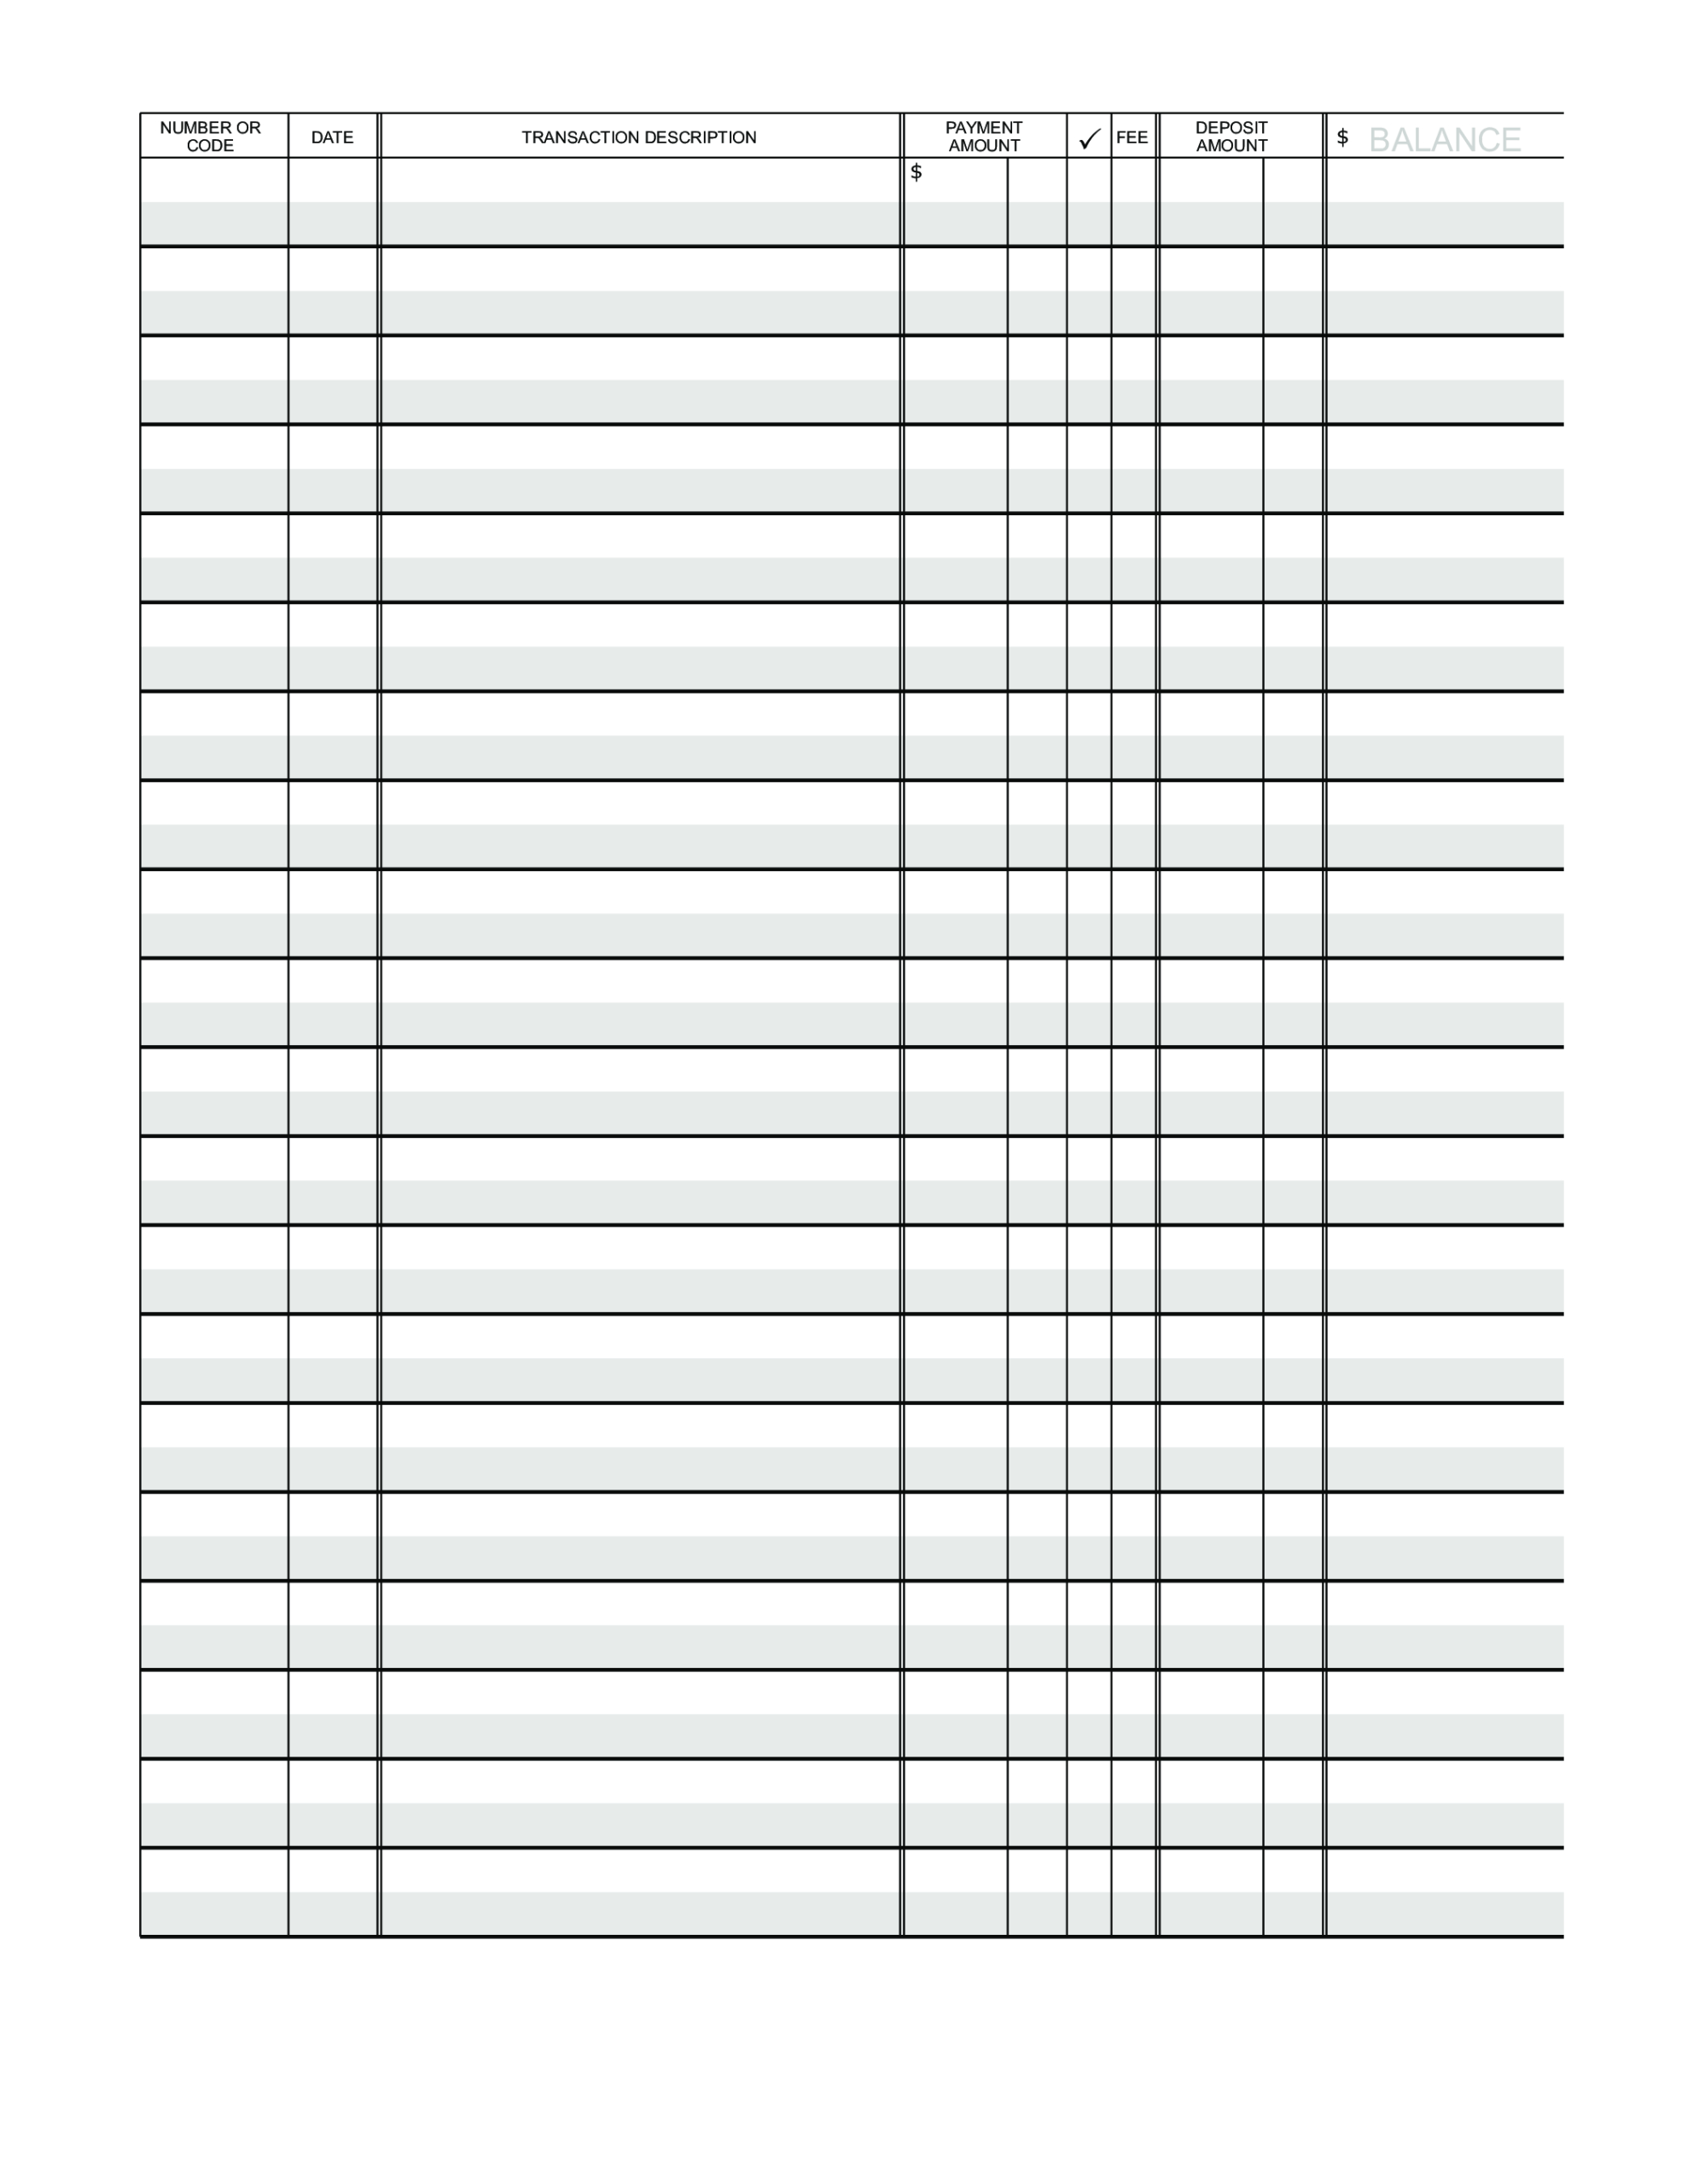 Blank Ledger Paper | Templates At Allbusinesstemplates With Blank Ledger Template